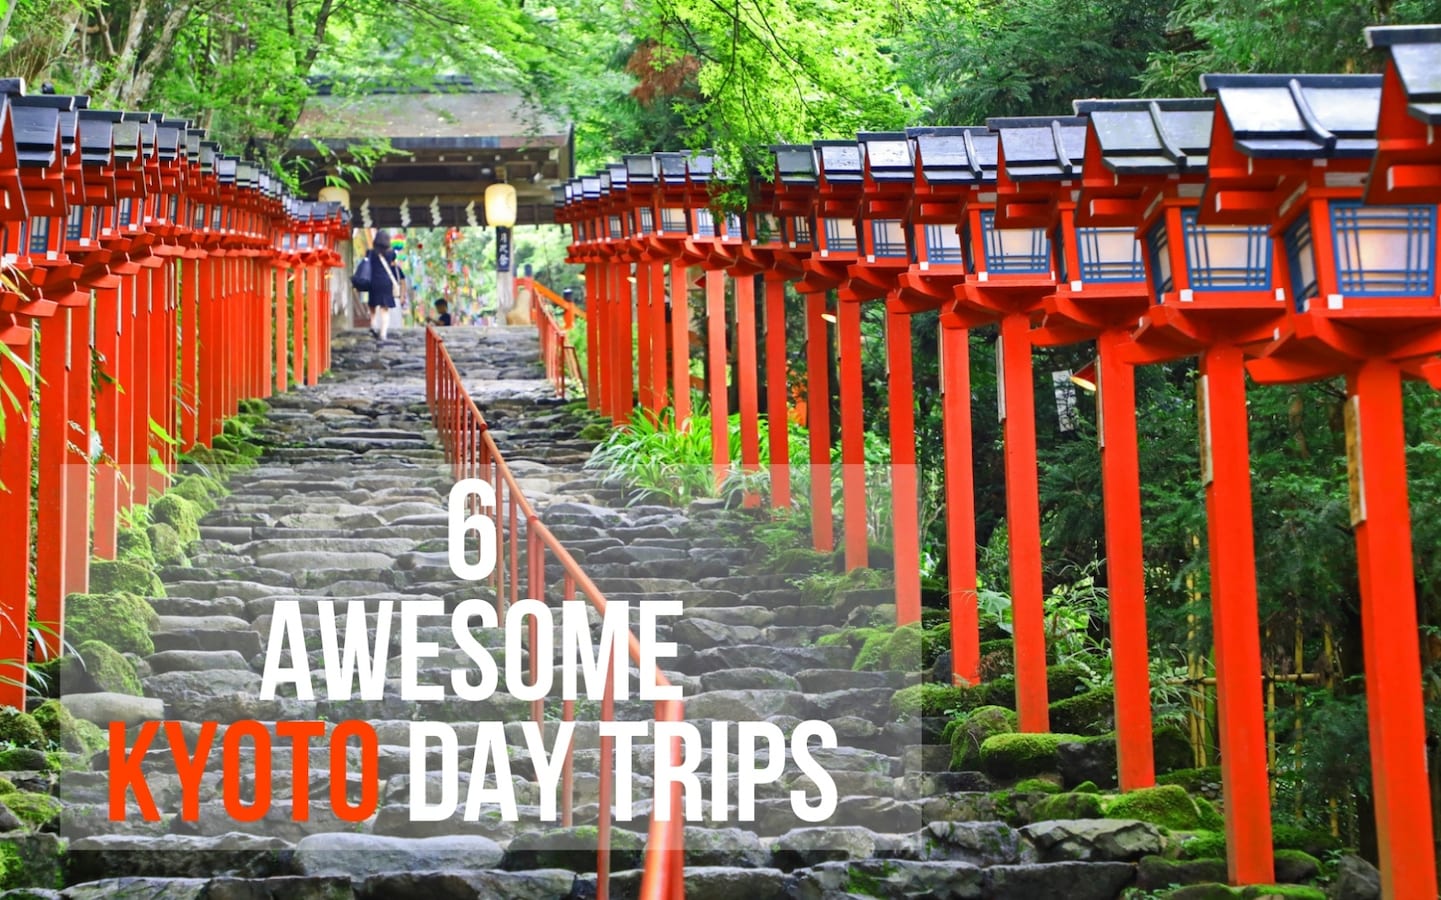 kyoto day trip from tokyo